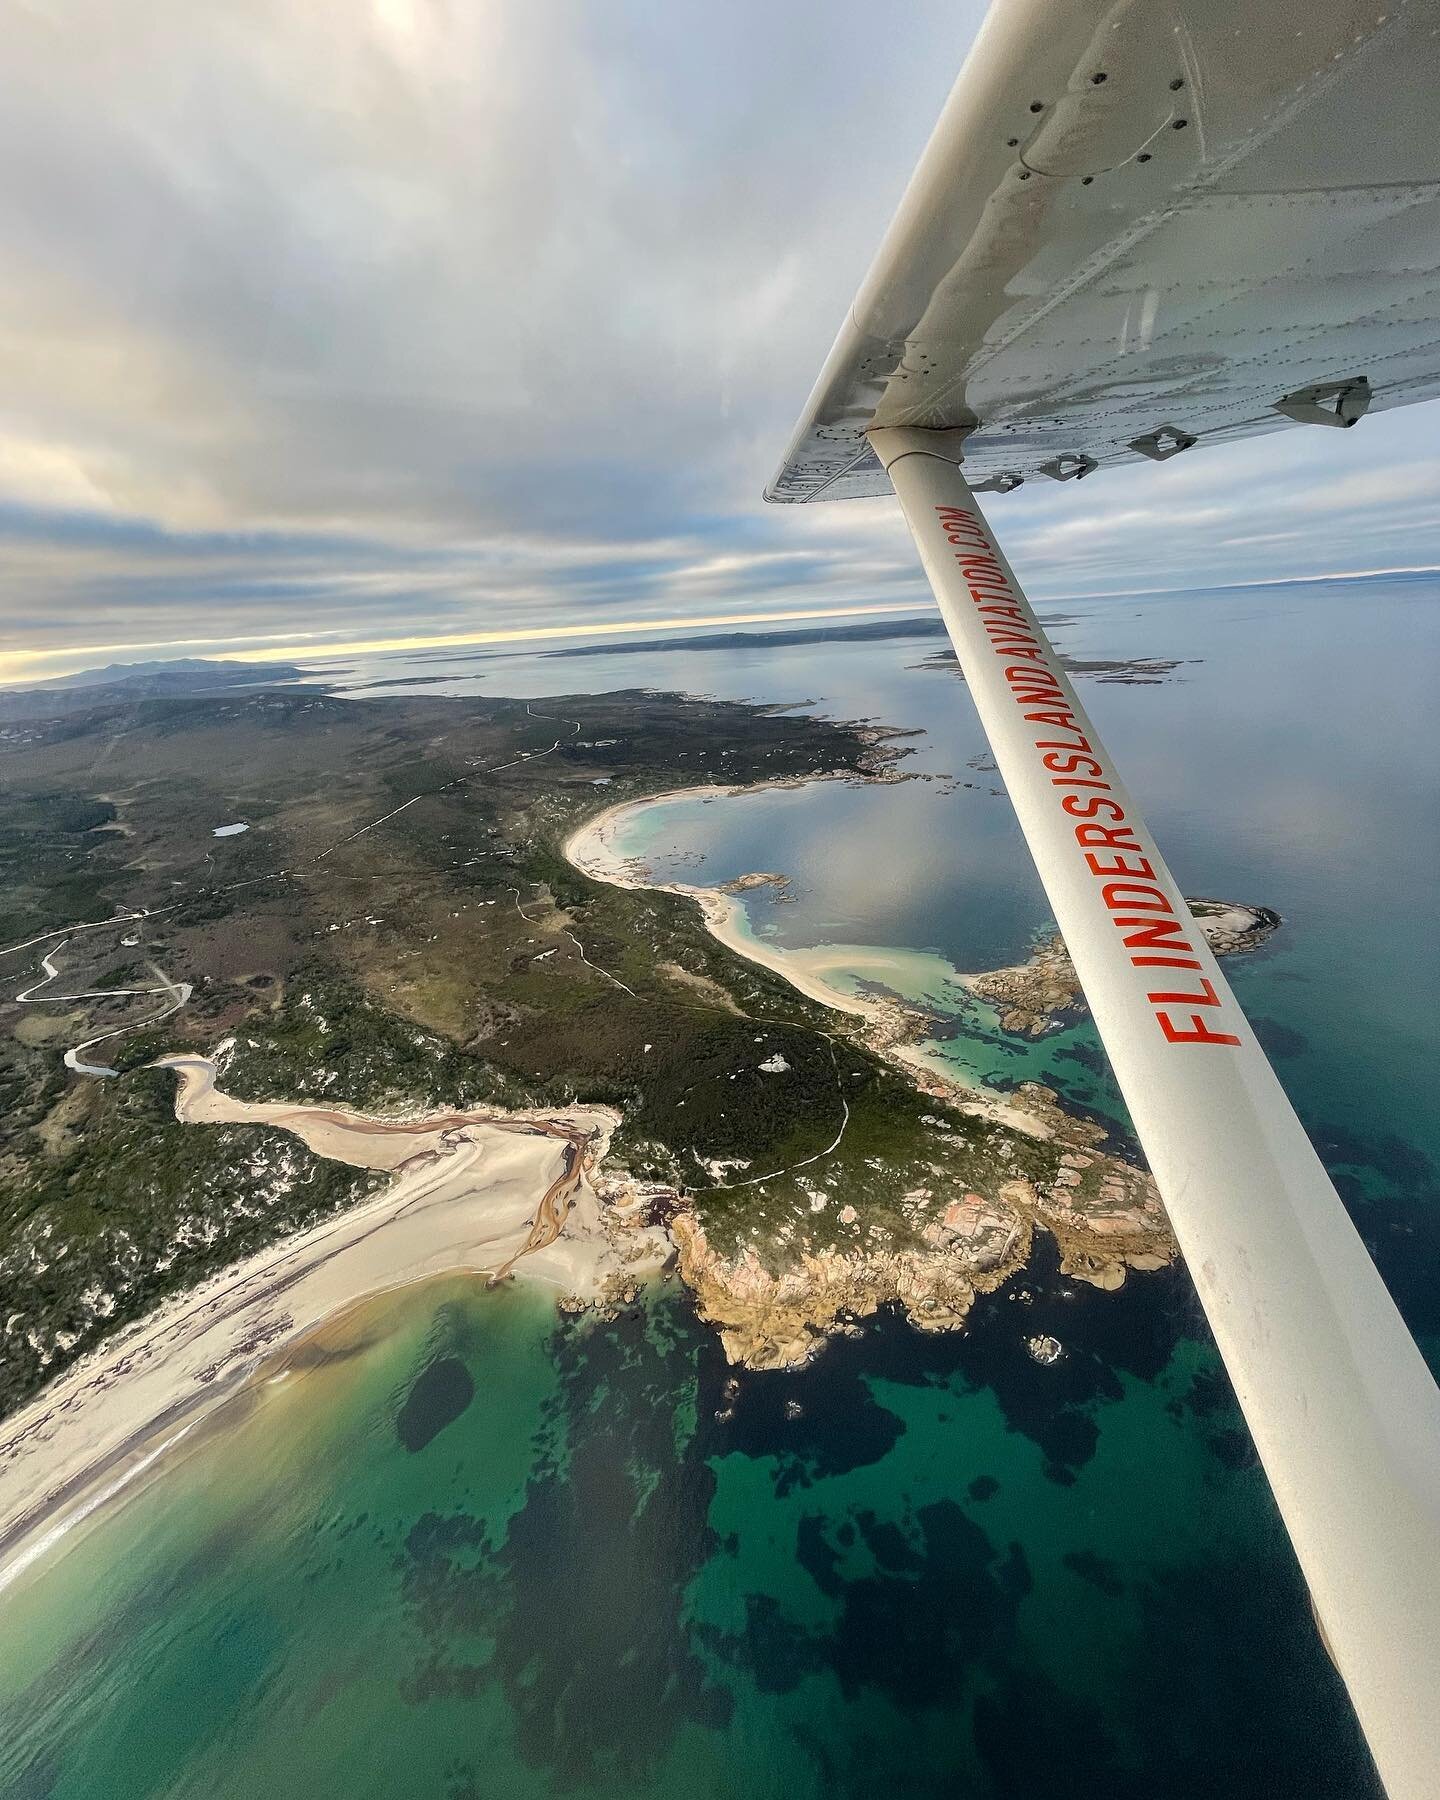 Explore breathtaking views on one of our scenic charter flights to Flinders Island! ☁️☀️